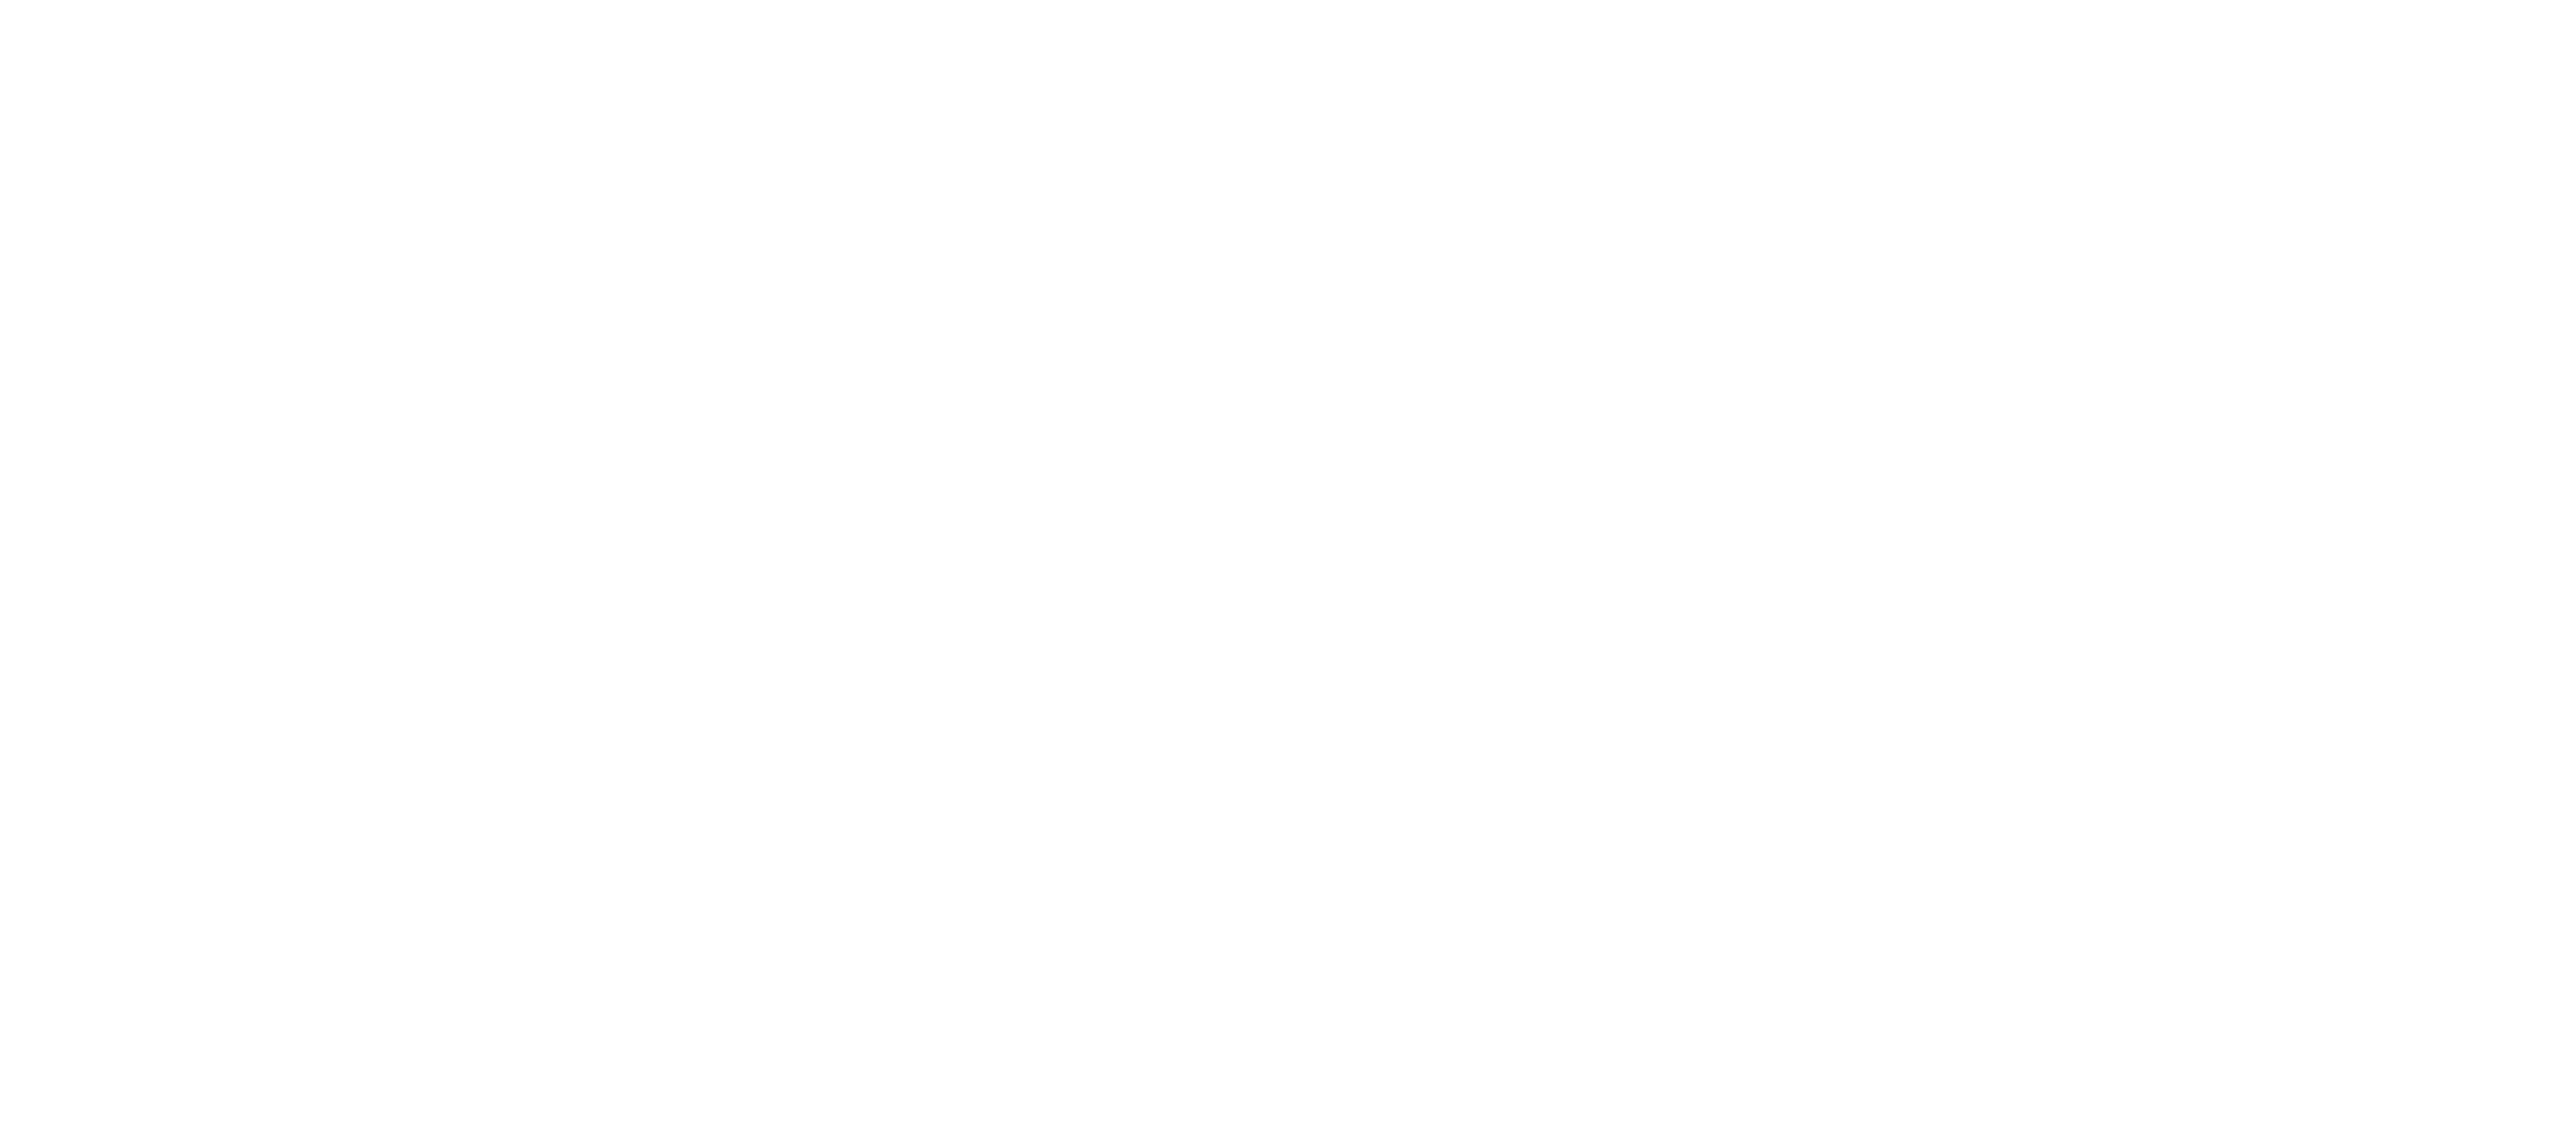 Todd Schroth Home Selling Team Brokered By EXP Realty